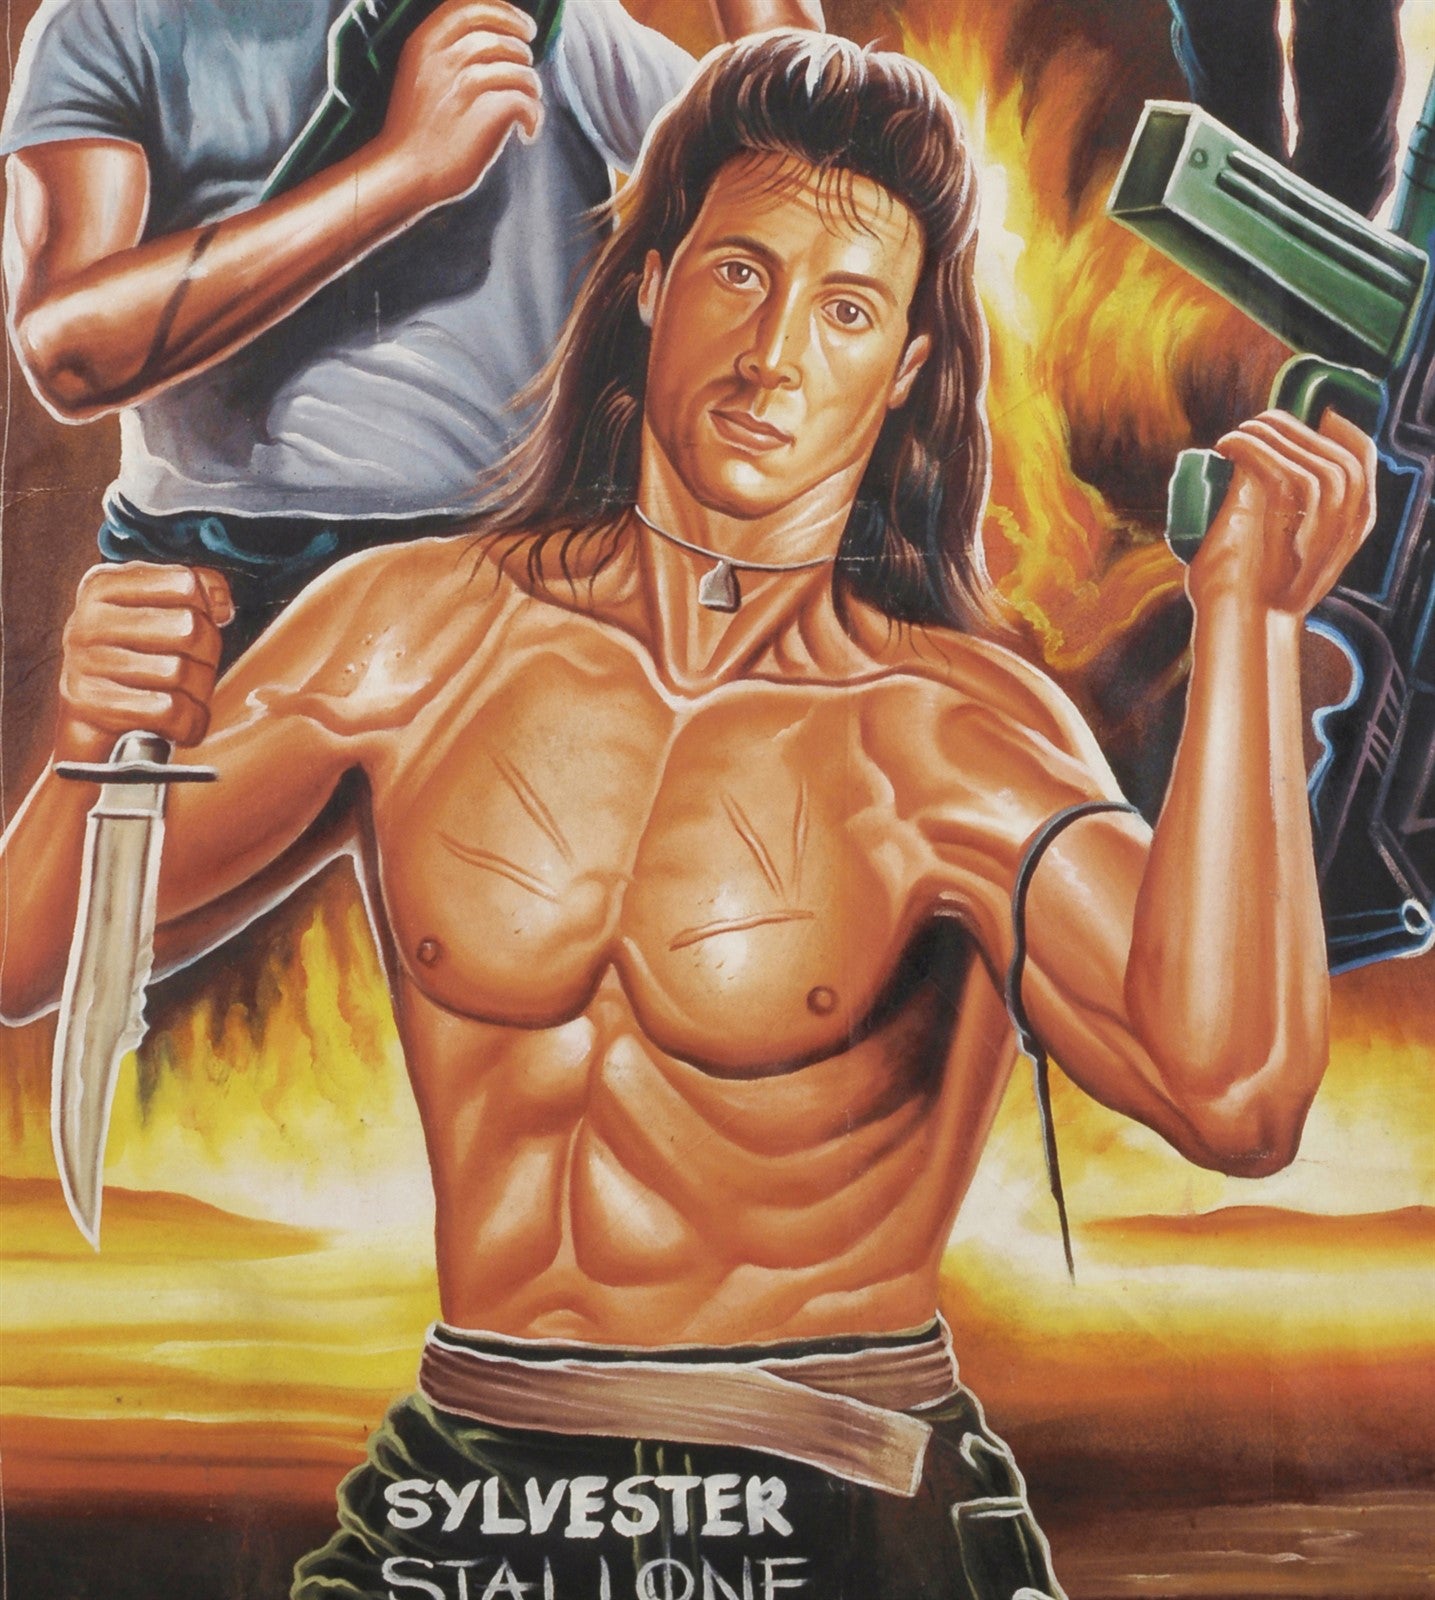 FIRST BLOOD RAMBO MOVIE POSTER HAND PAINTED IN GHANA FOR THE LOCAL CINEMA DETAILS